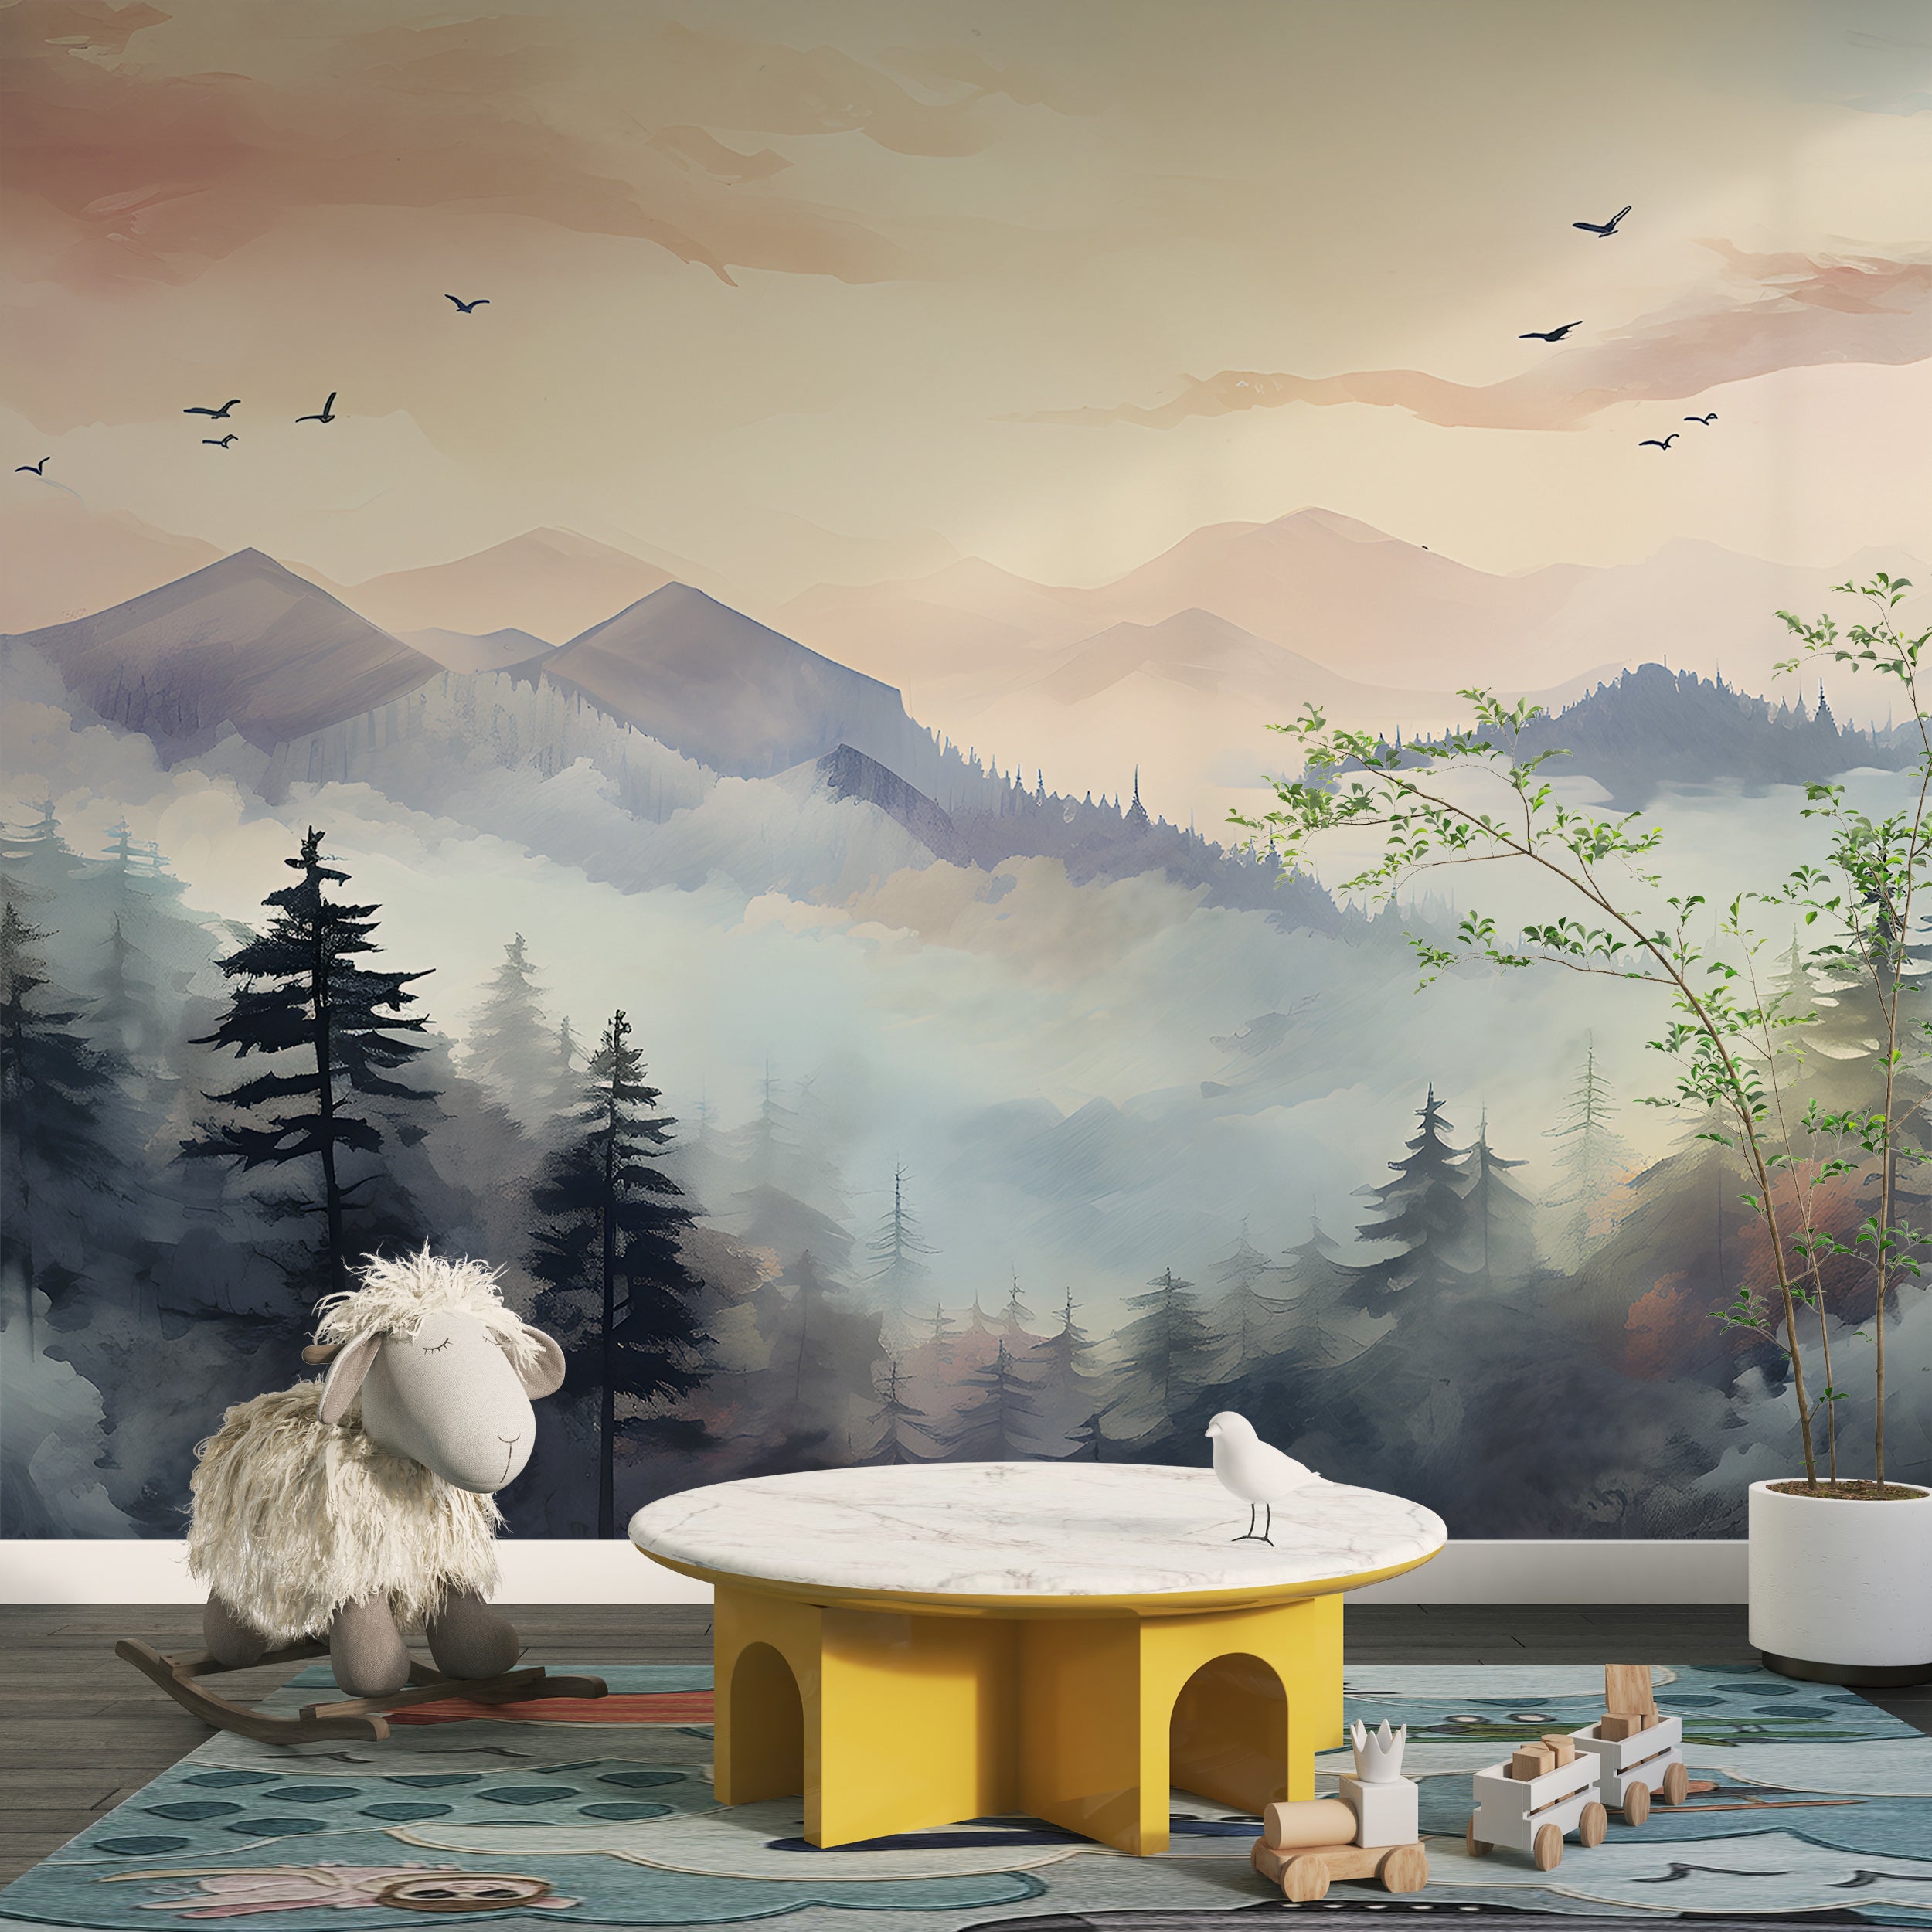 Captivating Forest and Mountains Design